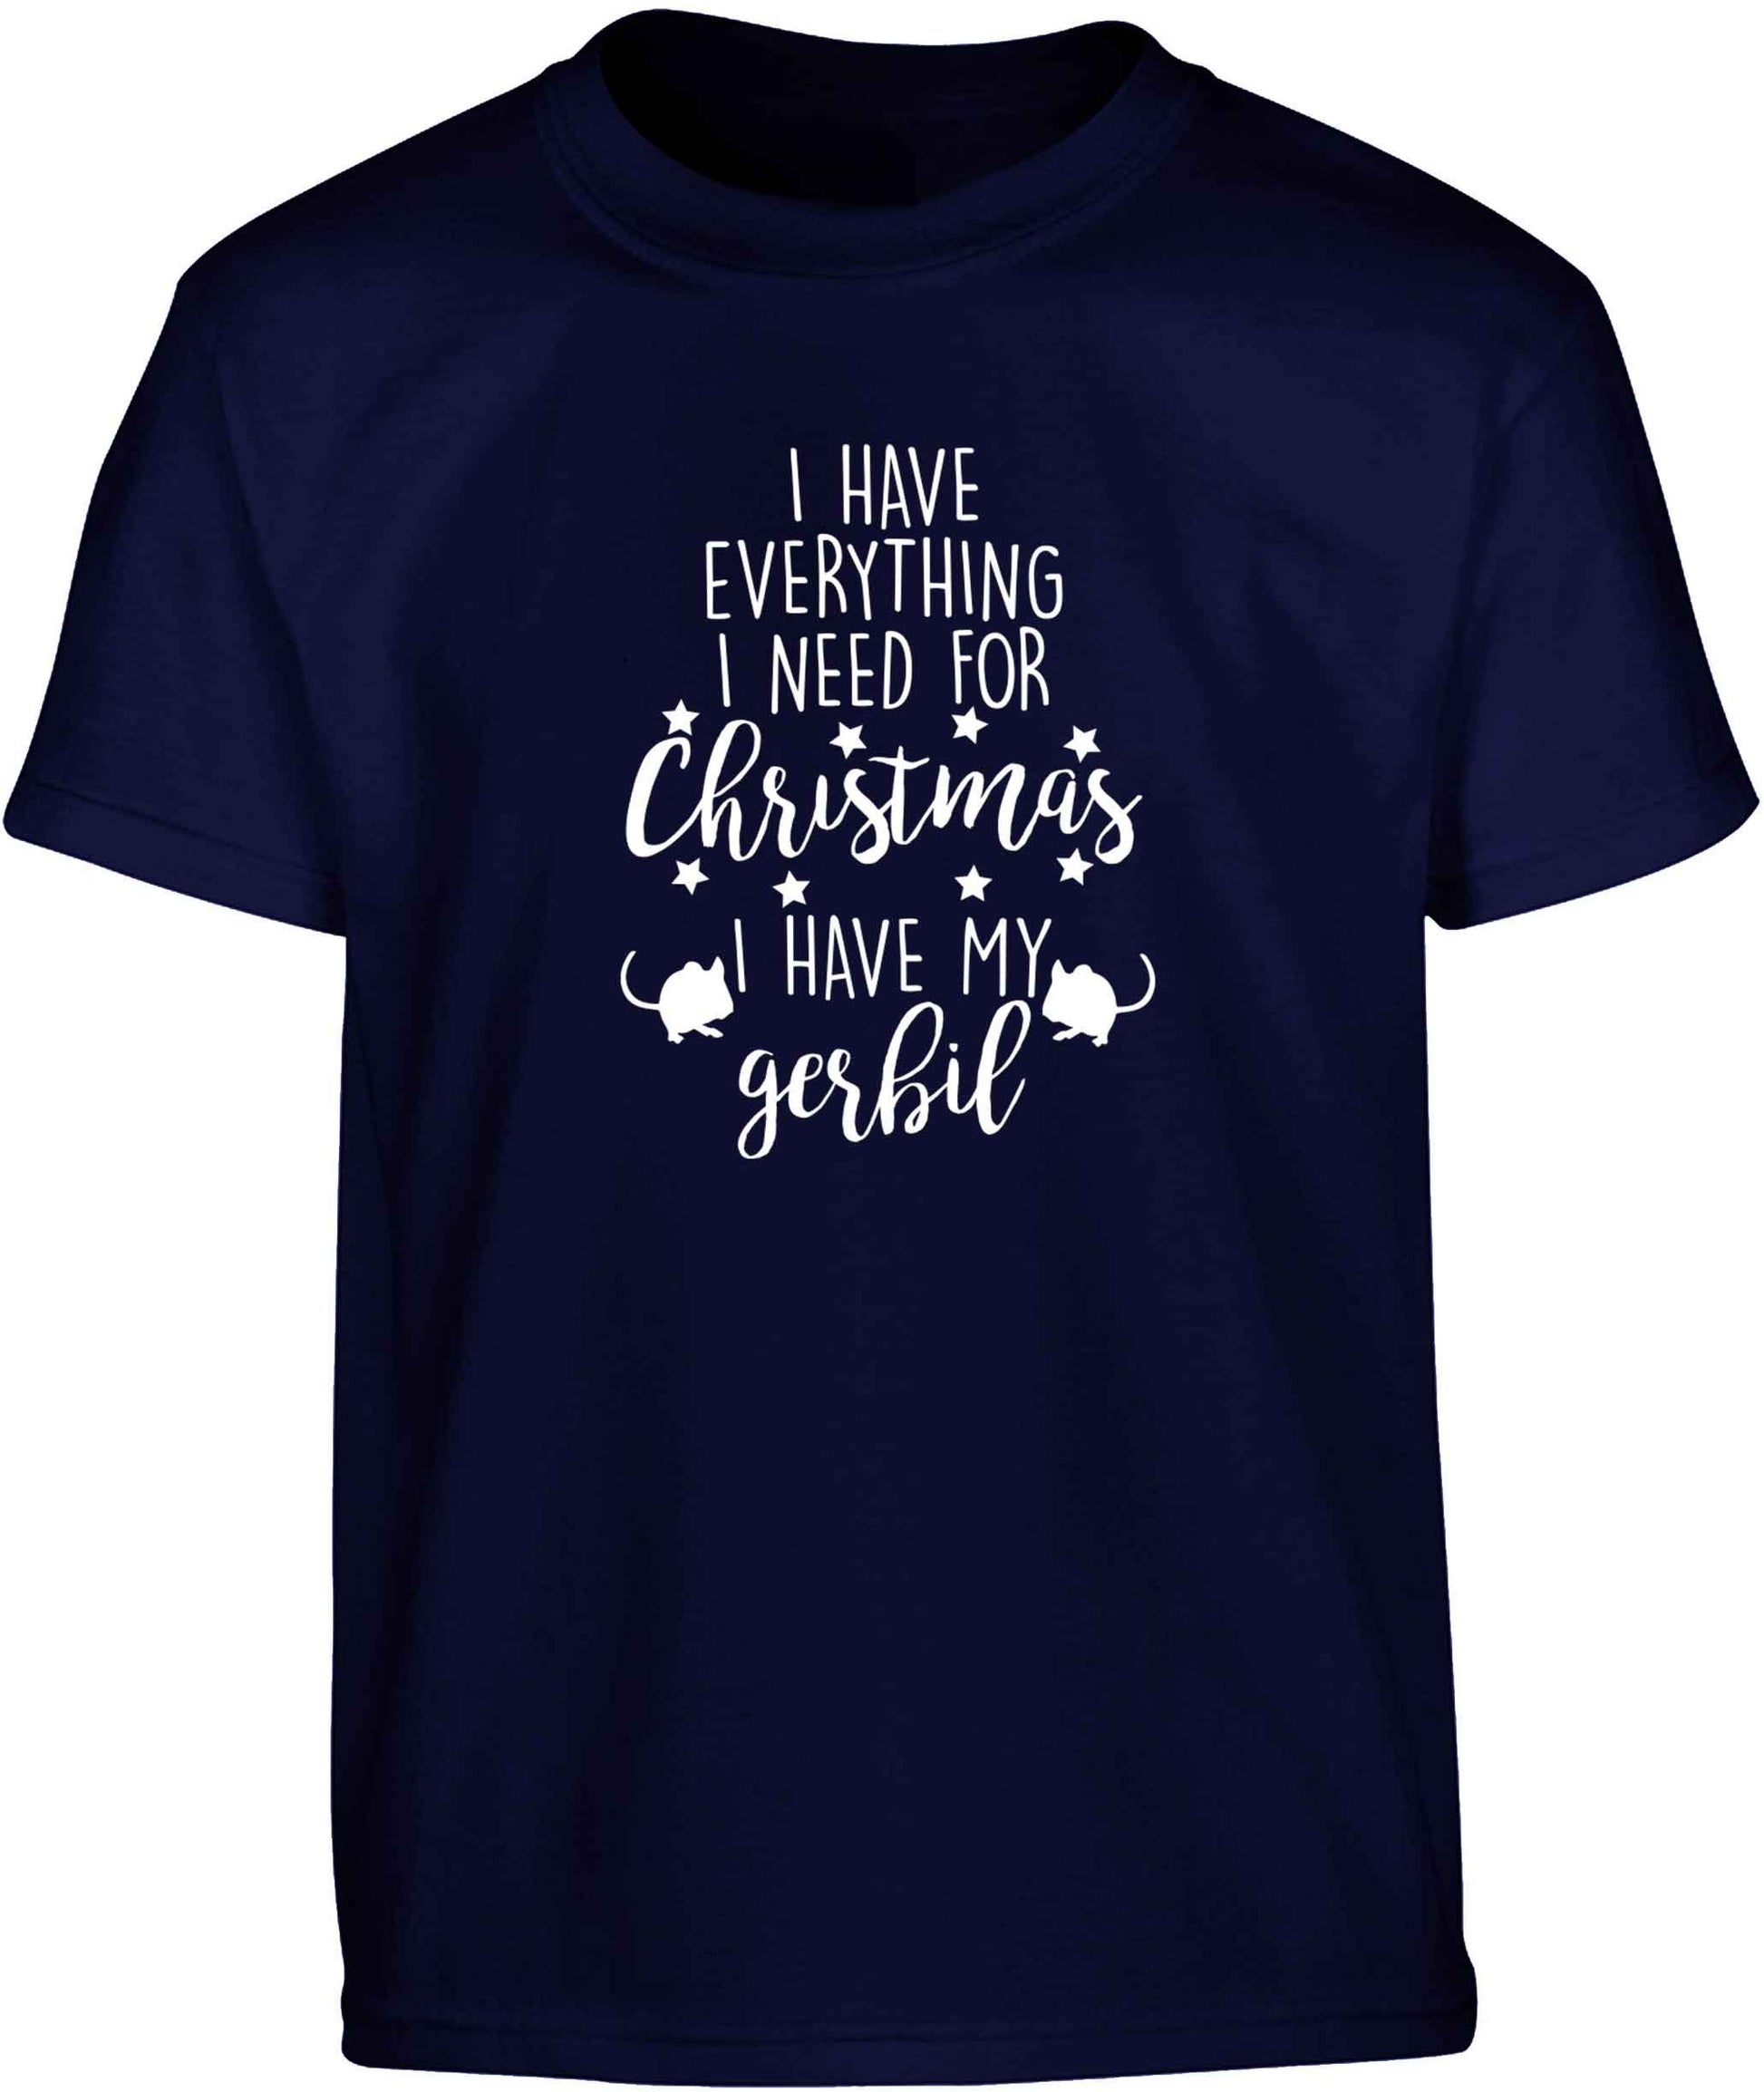 I have everything I need for Christmas I have my gerbil Children's navy Tshirt 12-13 Years